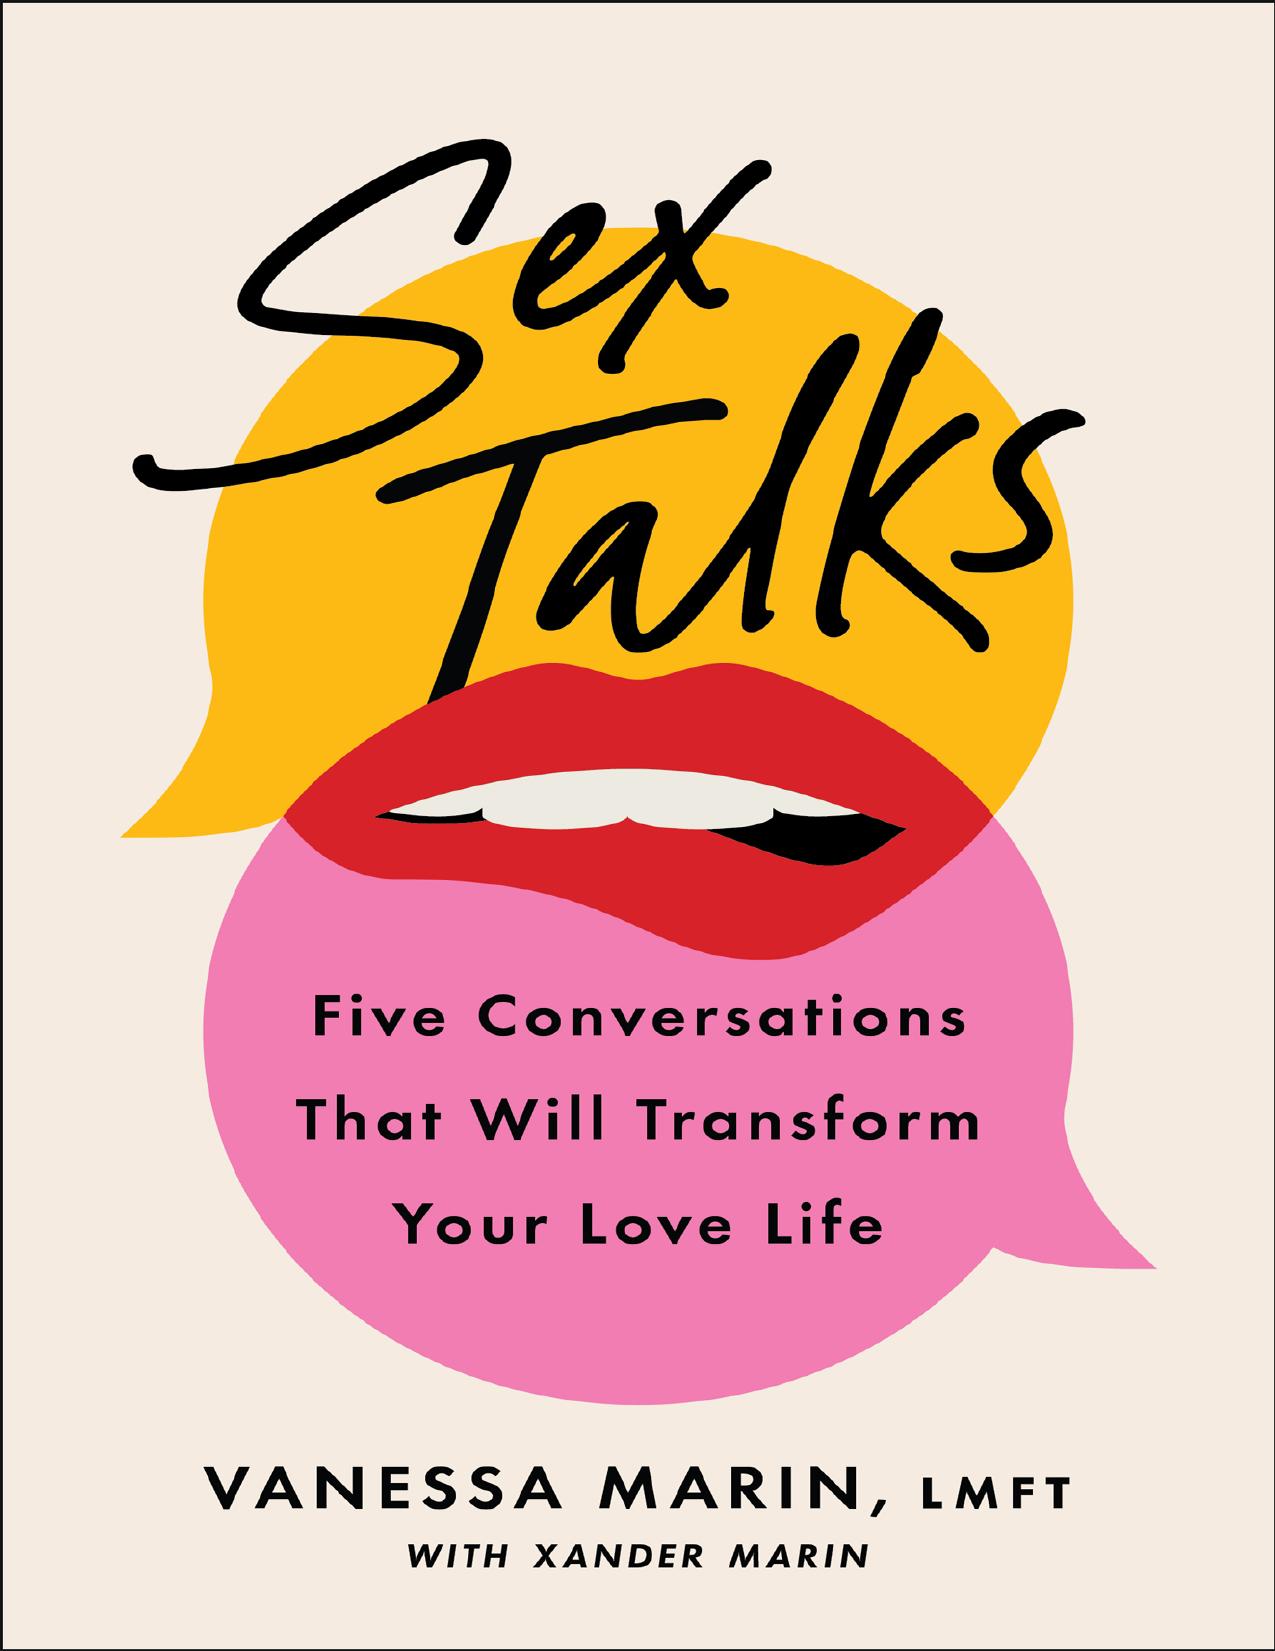 Sex Talks: The Five Conversations That Will Transform Your Love Life by Vanessa Marin